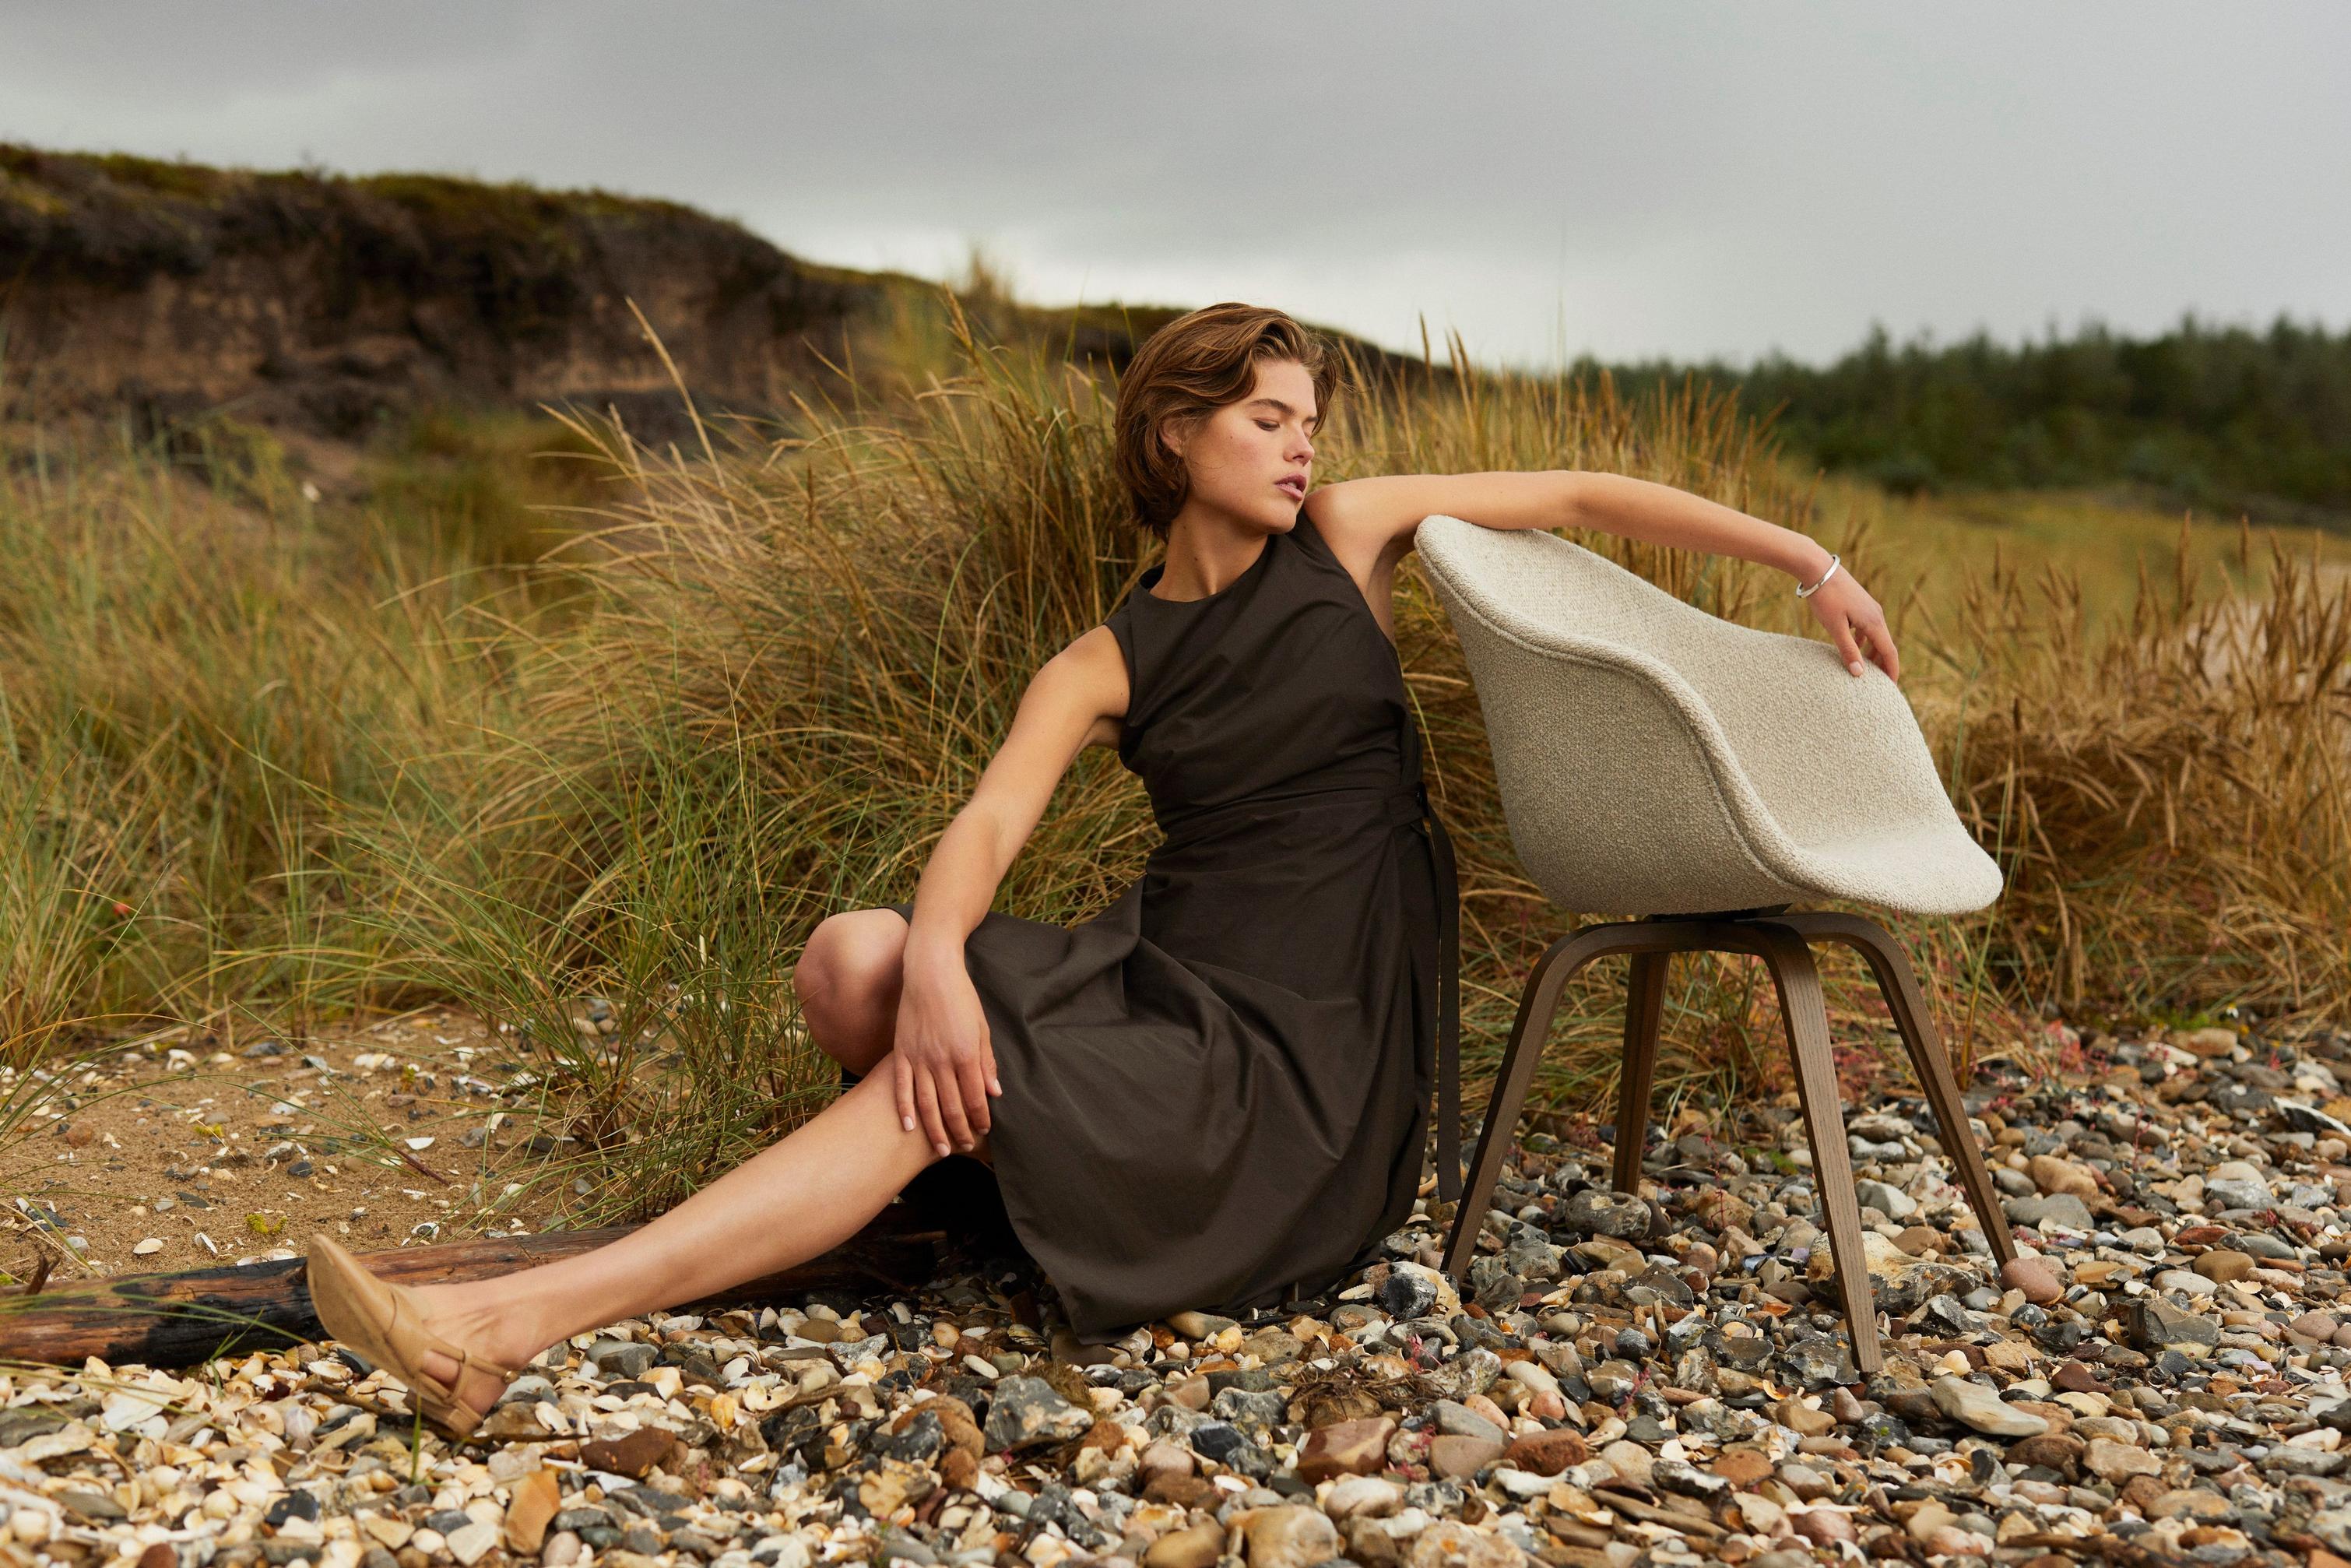 On a field next the beach, a woman leans on a Hauge dining chair covered in beige Lazio fabric.